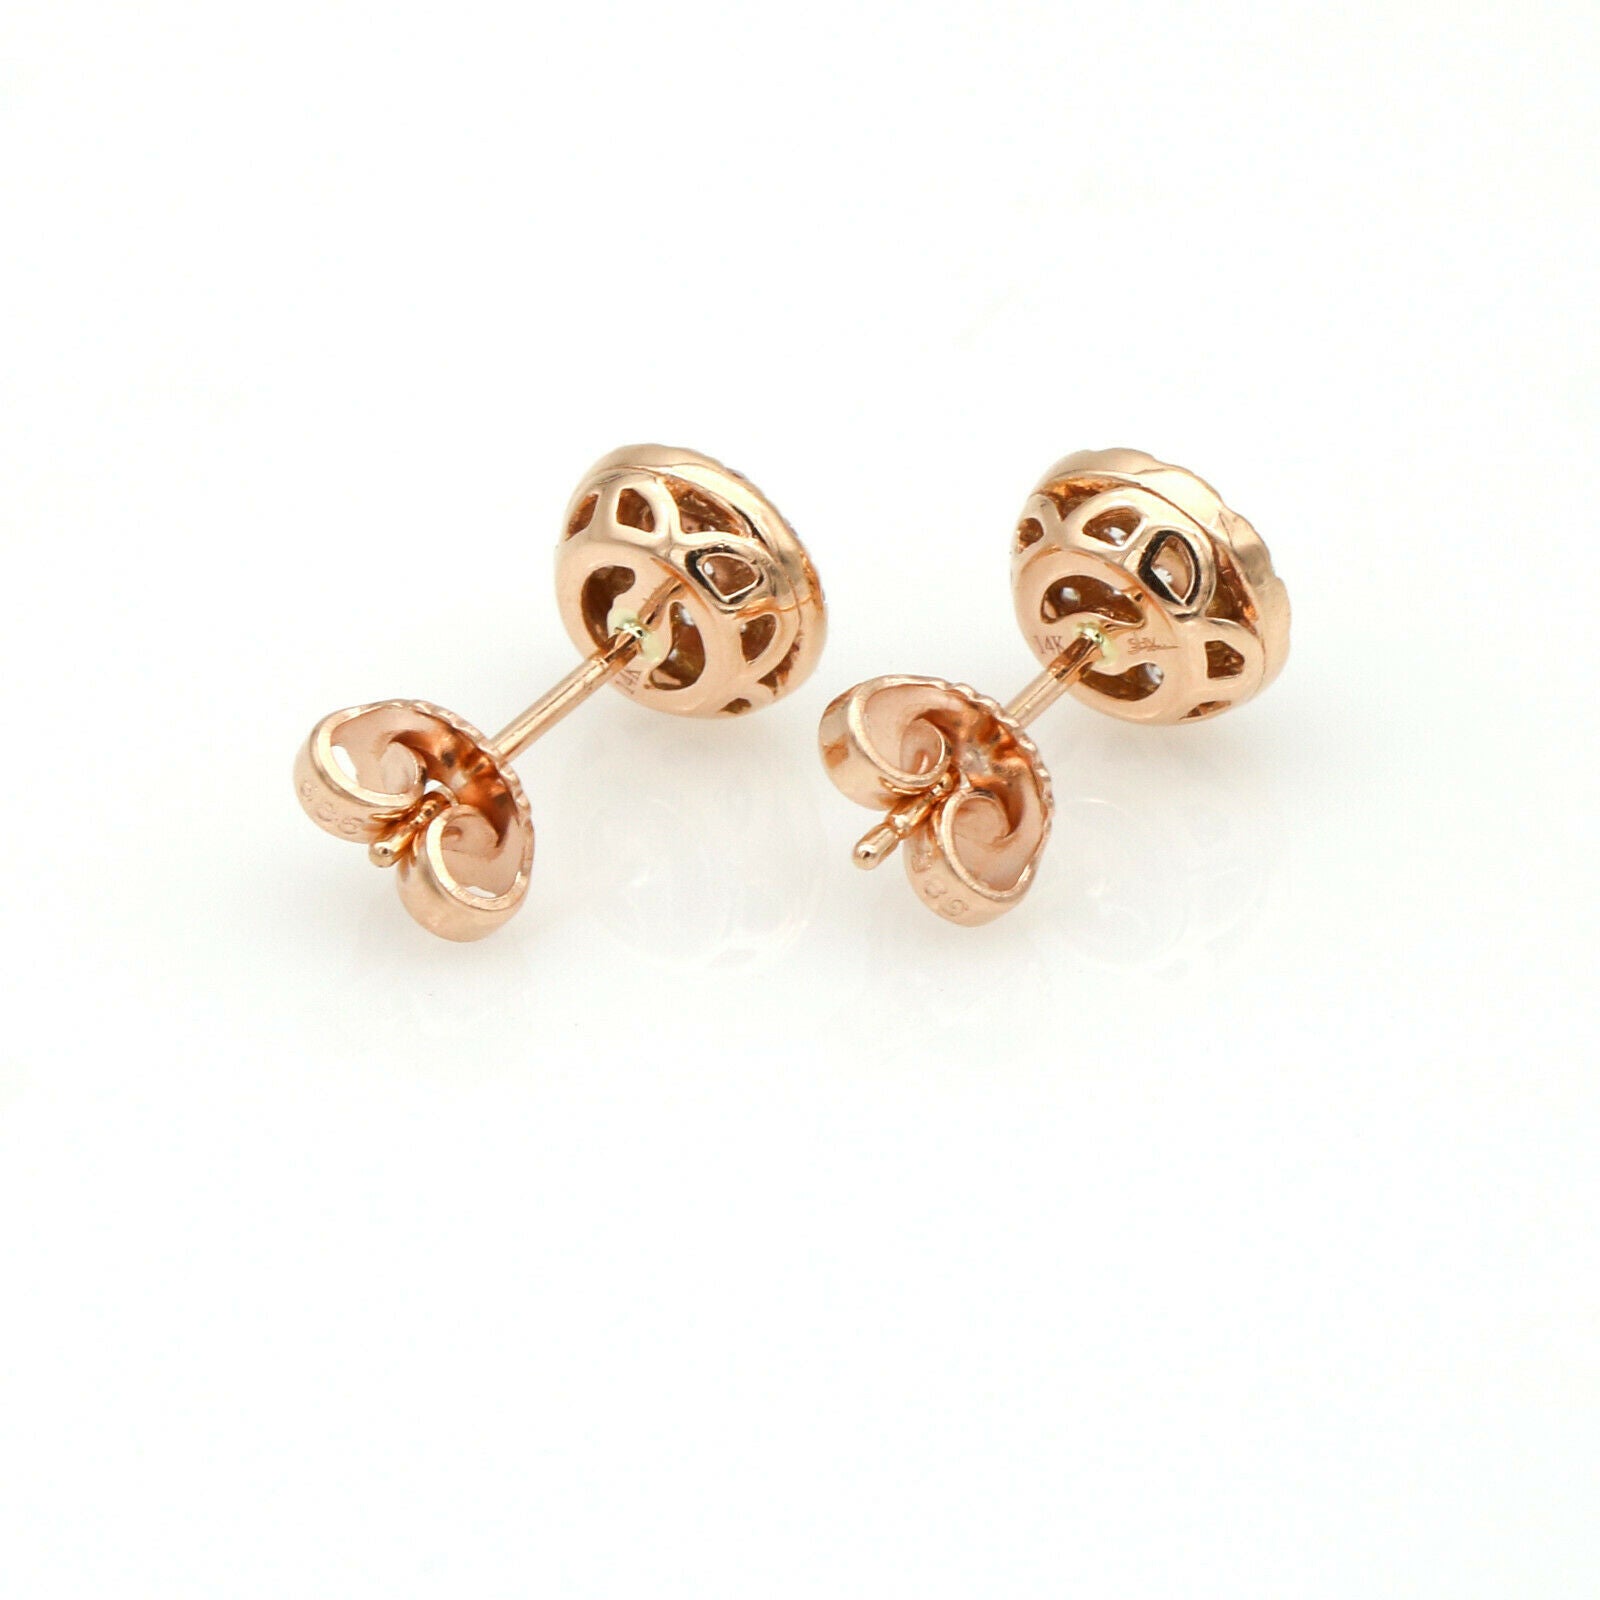 Shy Creations Pave Diamond Round Stud Earrings in 14k Rose Gold